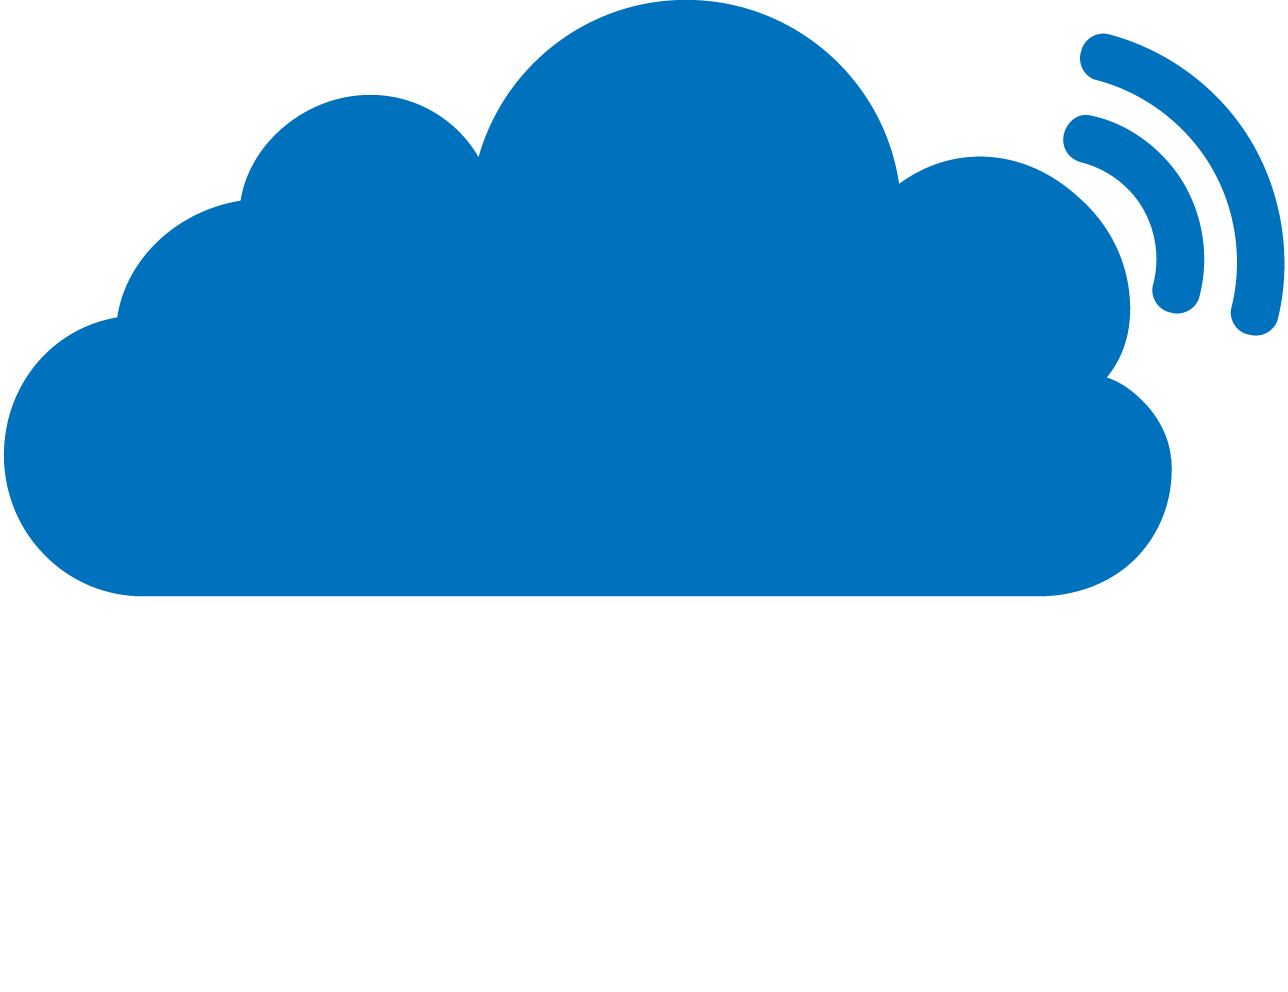 The Things Network